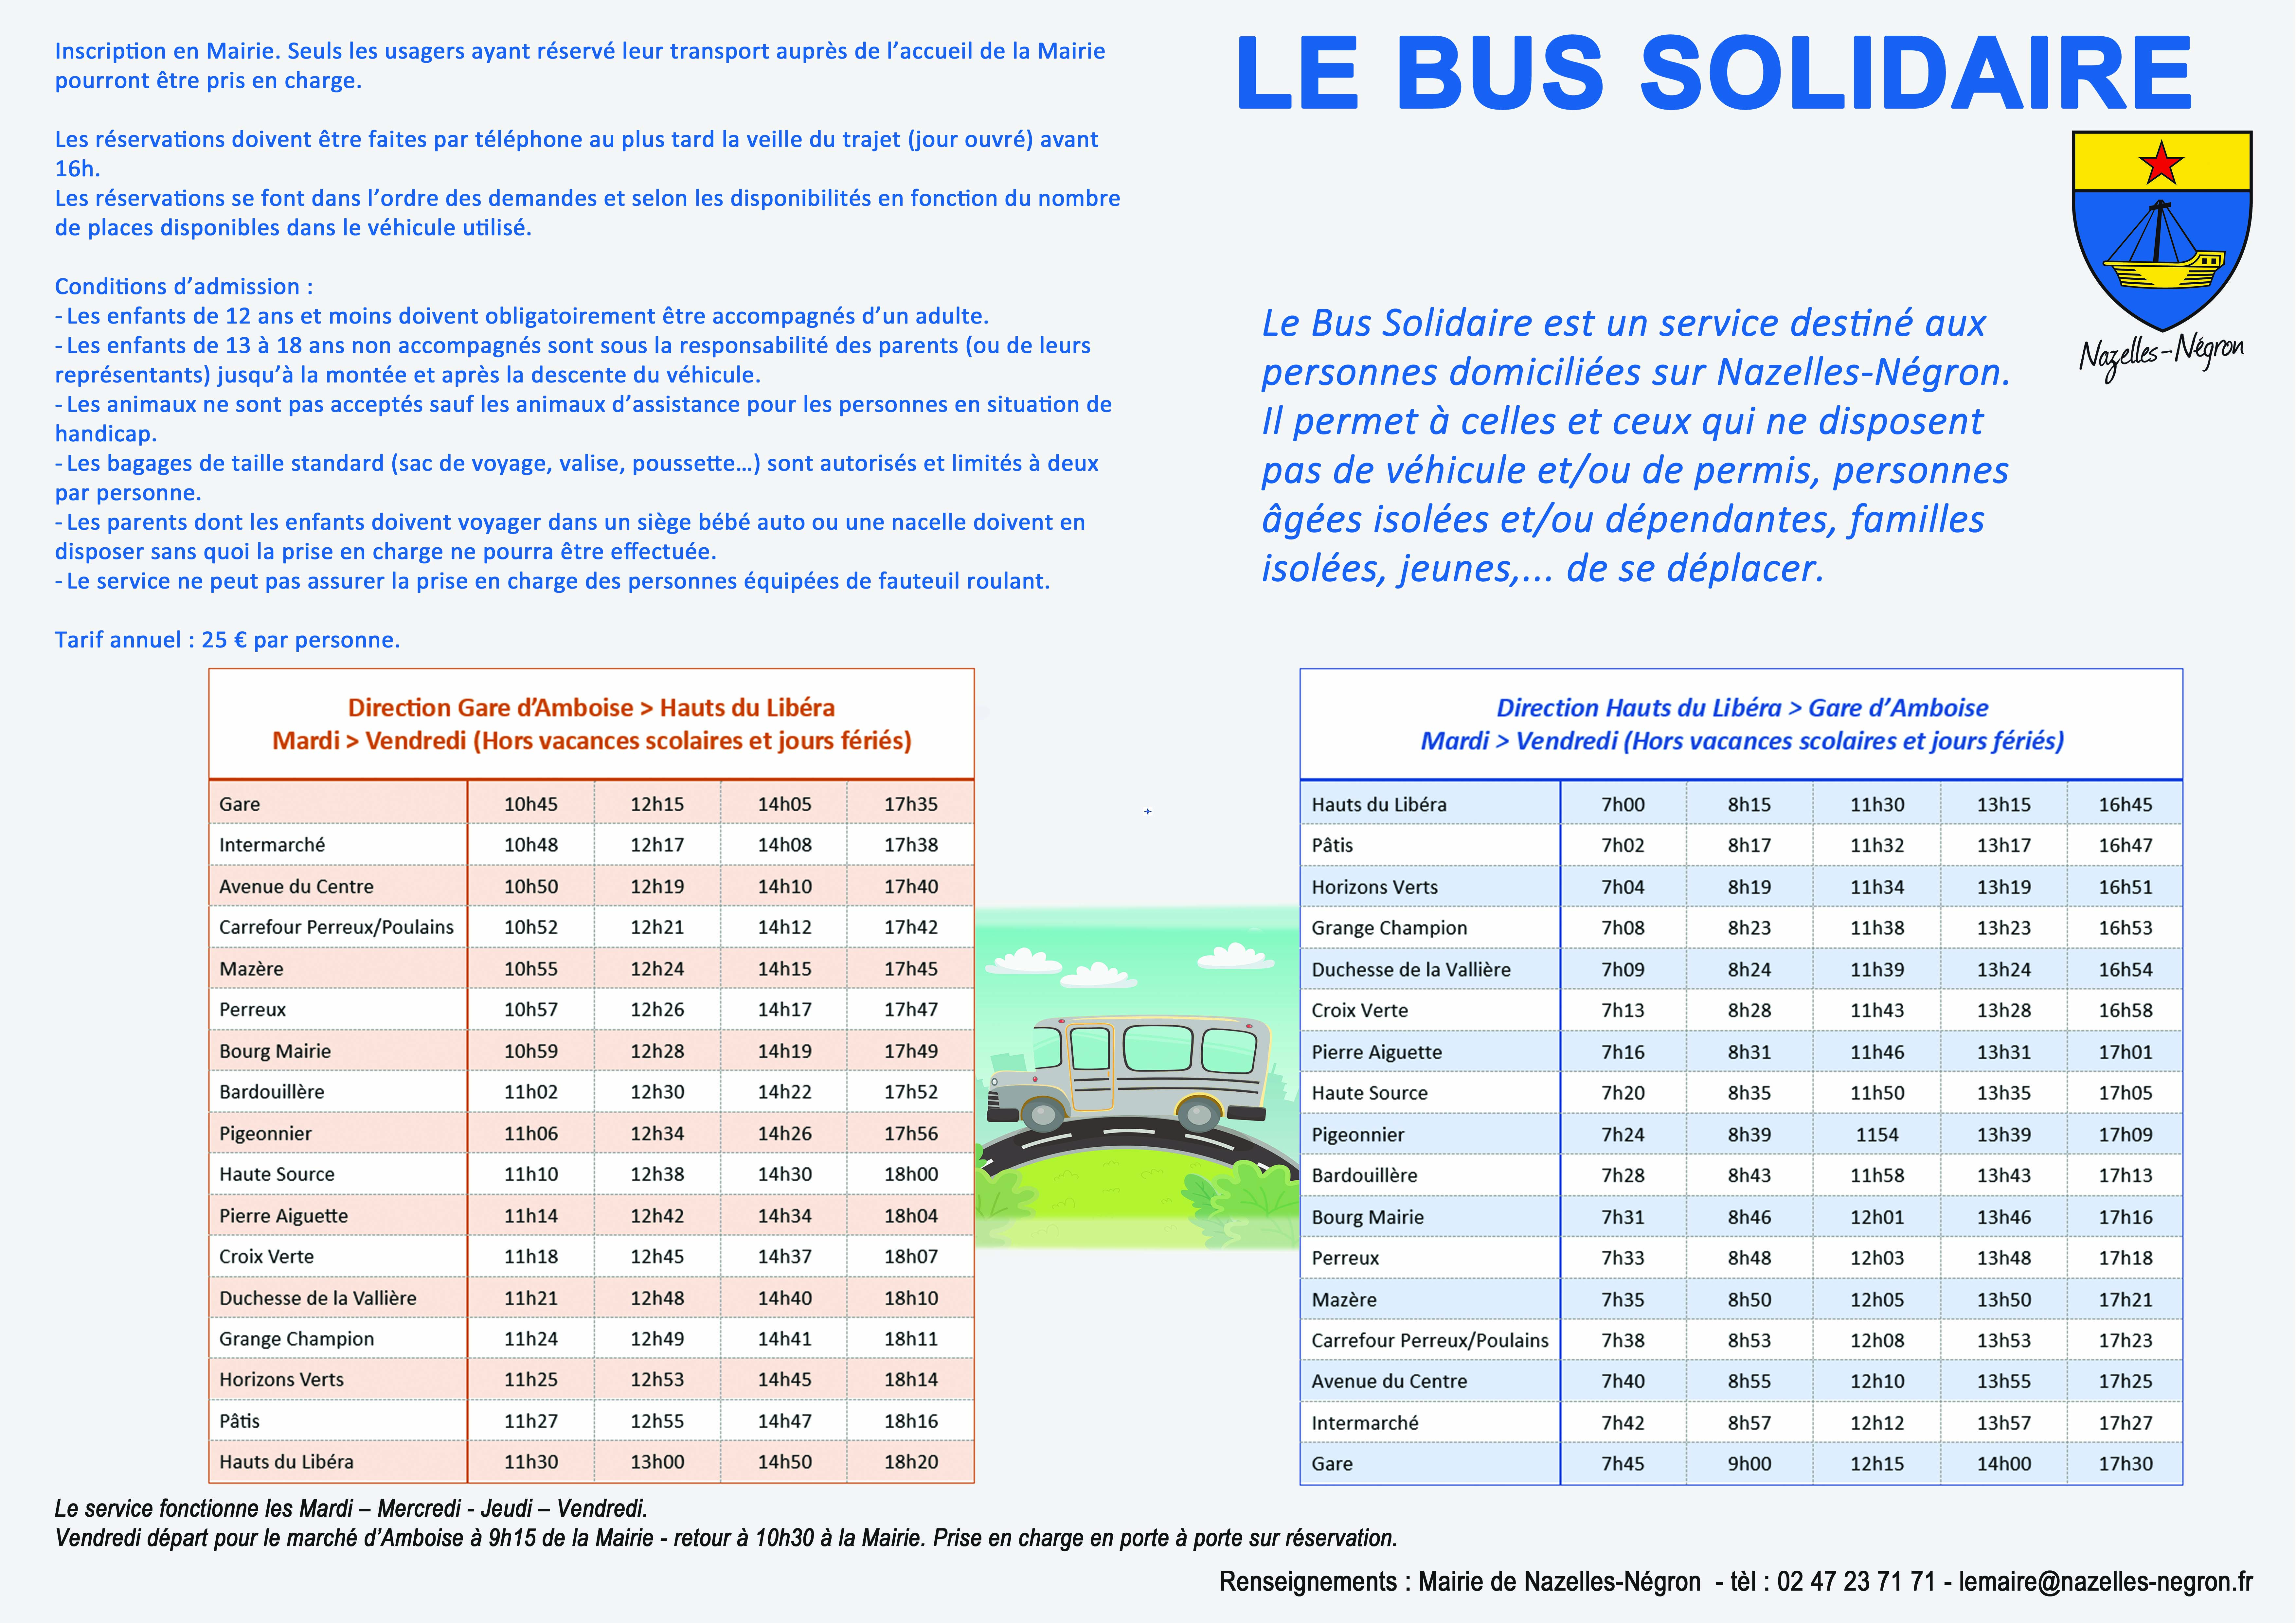 Horaires bus solidaire